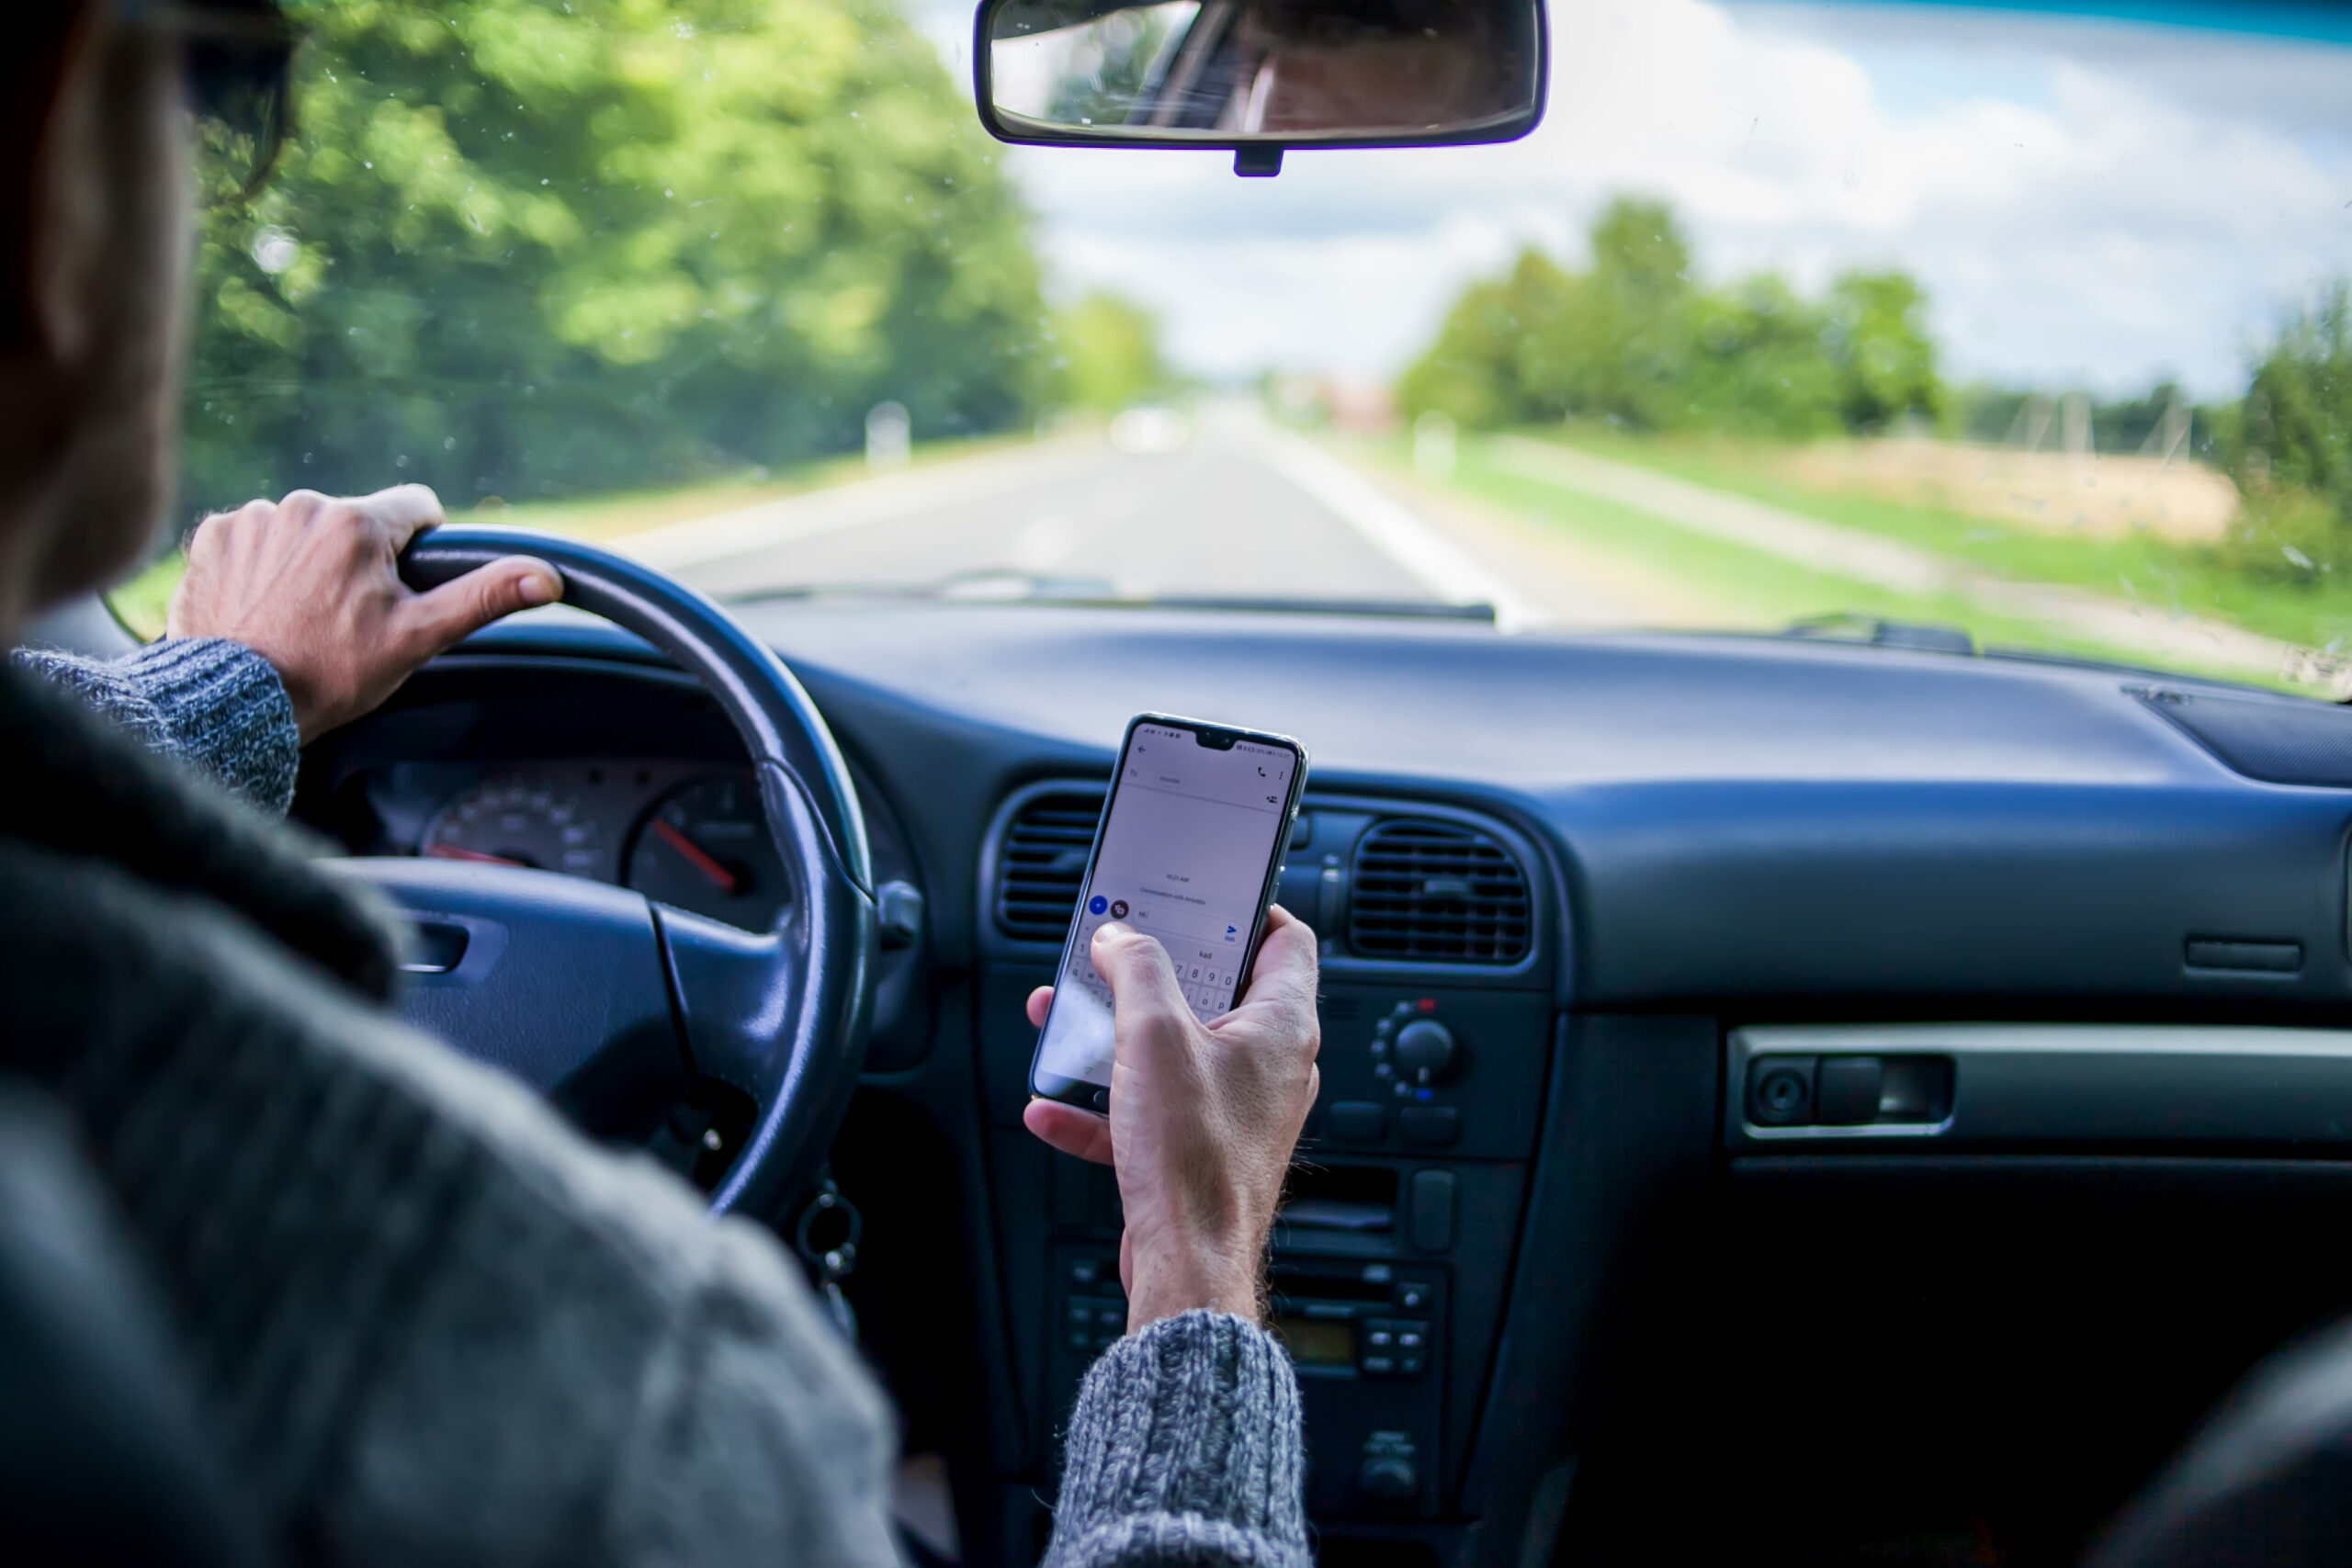 A man is using a cell phone doing what is considered distracted driving.